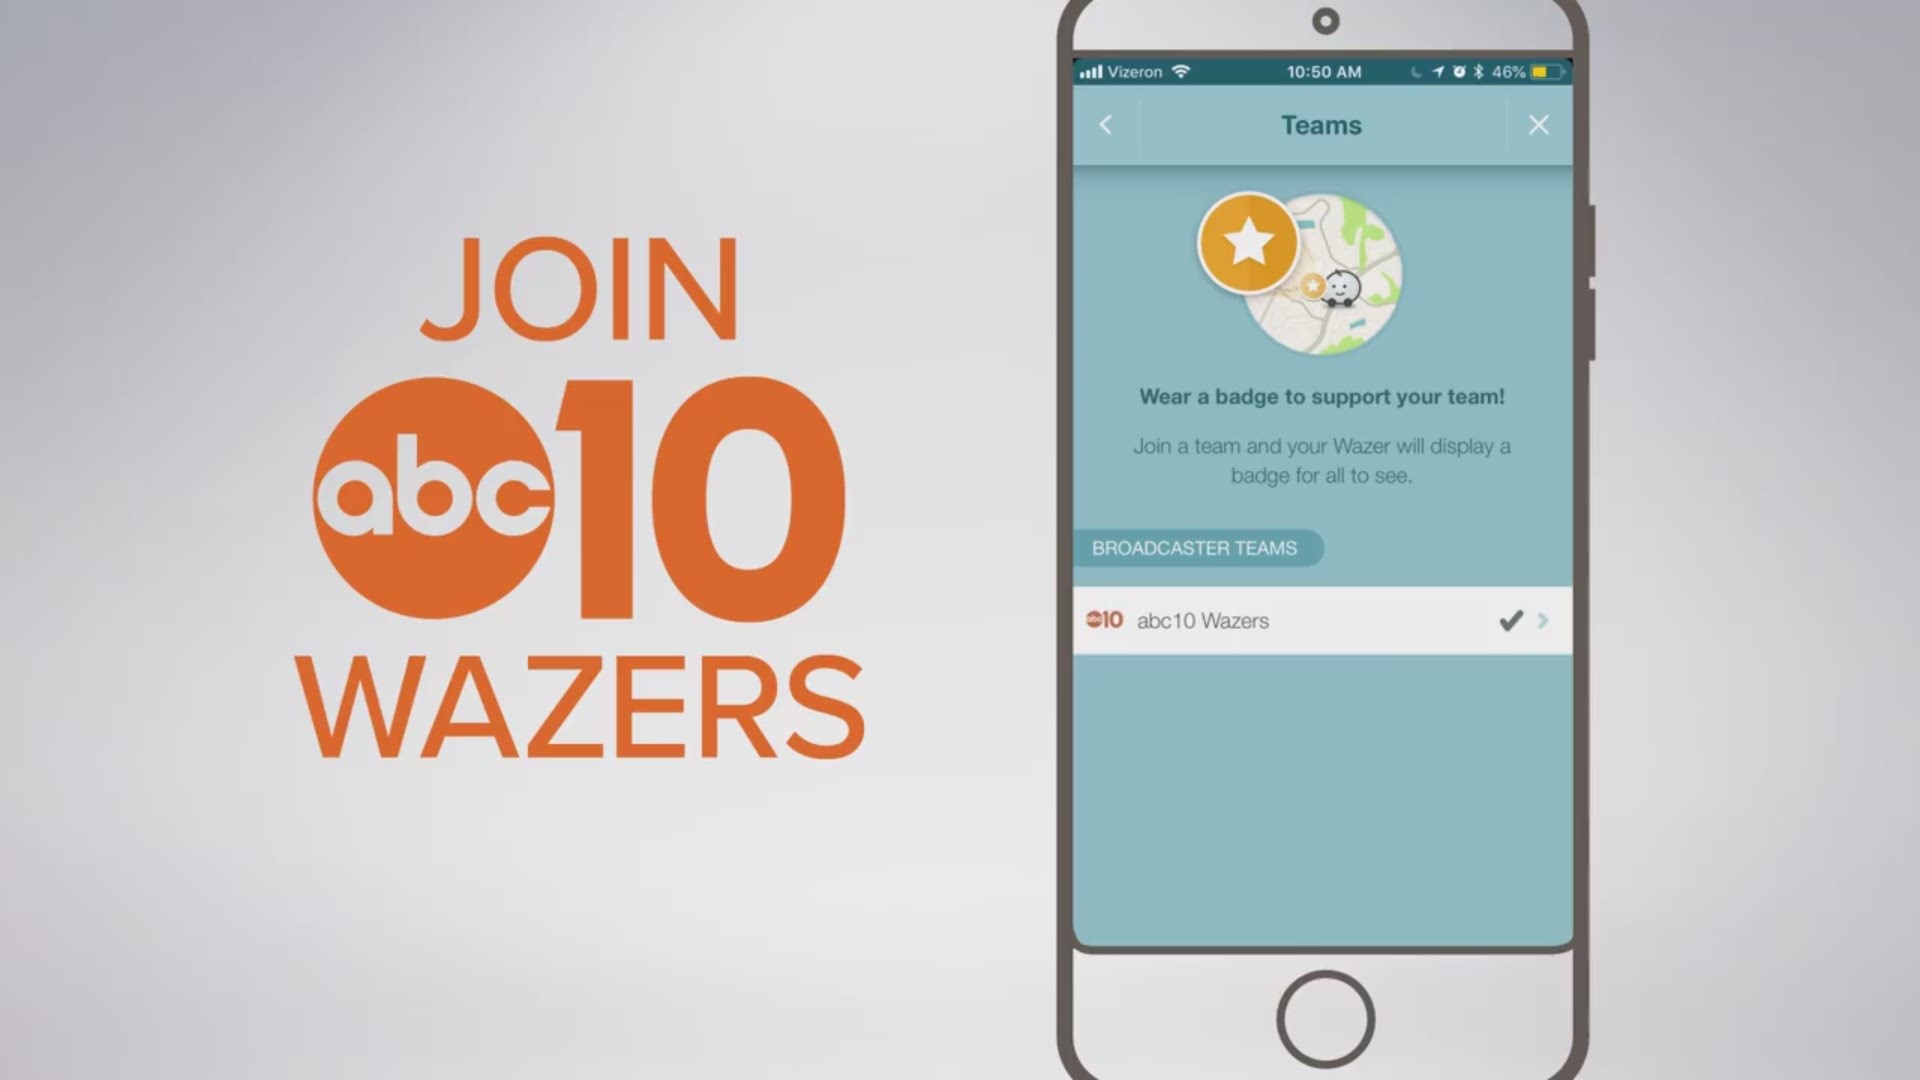 We've teamed with Waze to bring you more traffic news and alerts. Here's how you can join our team!